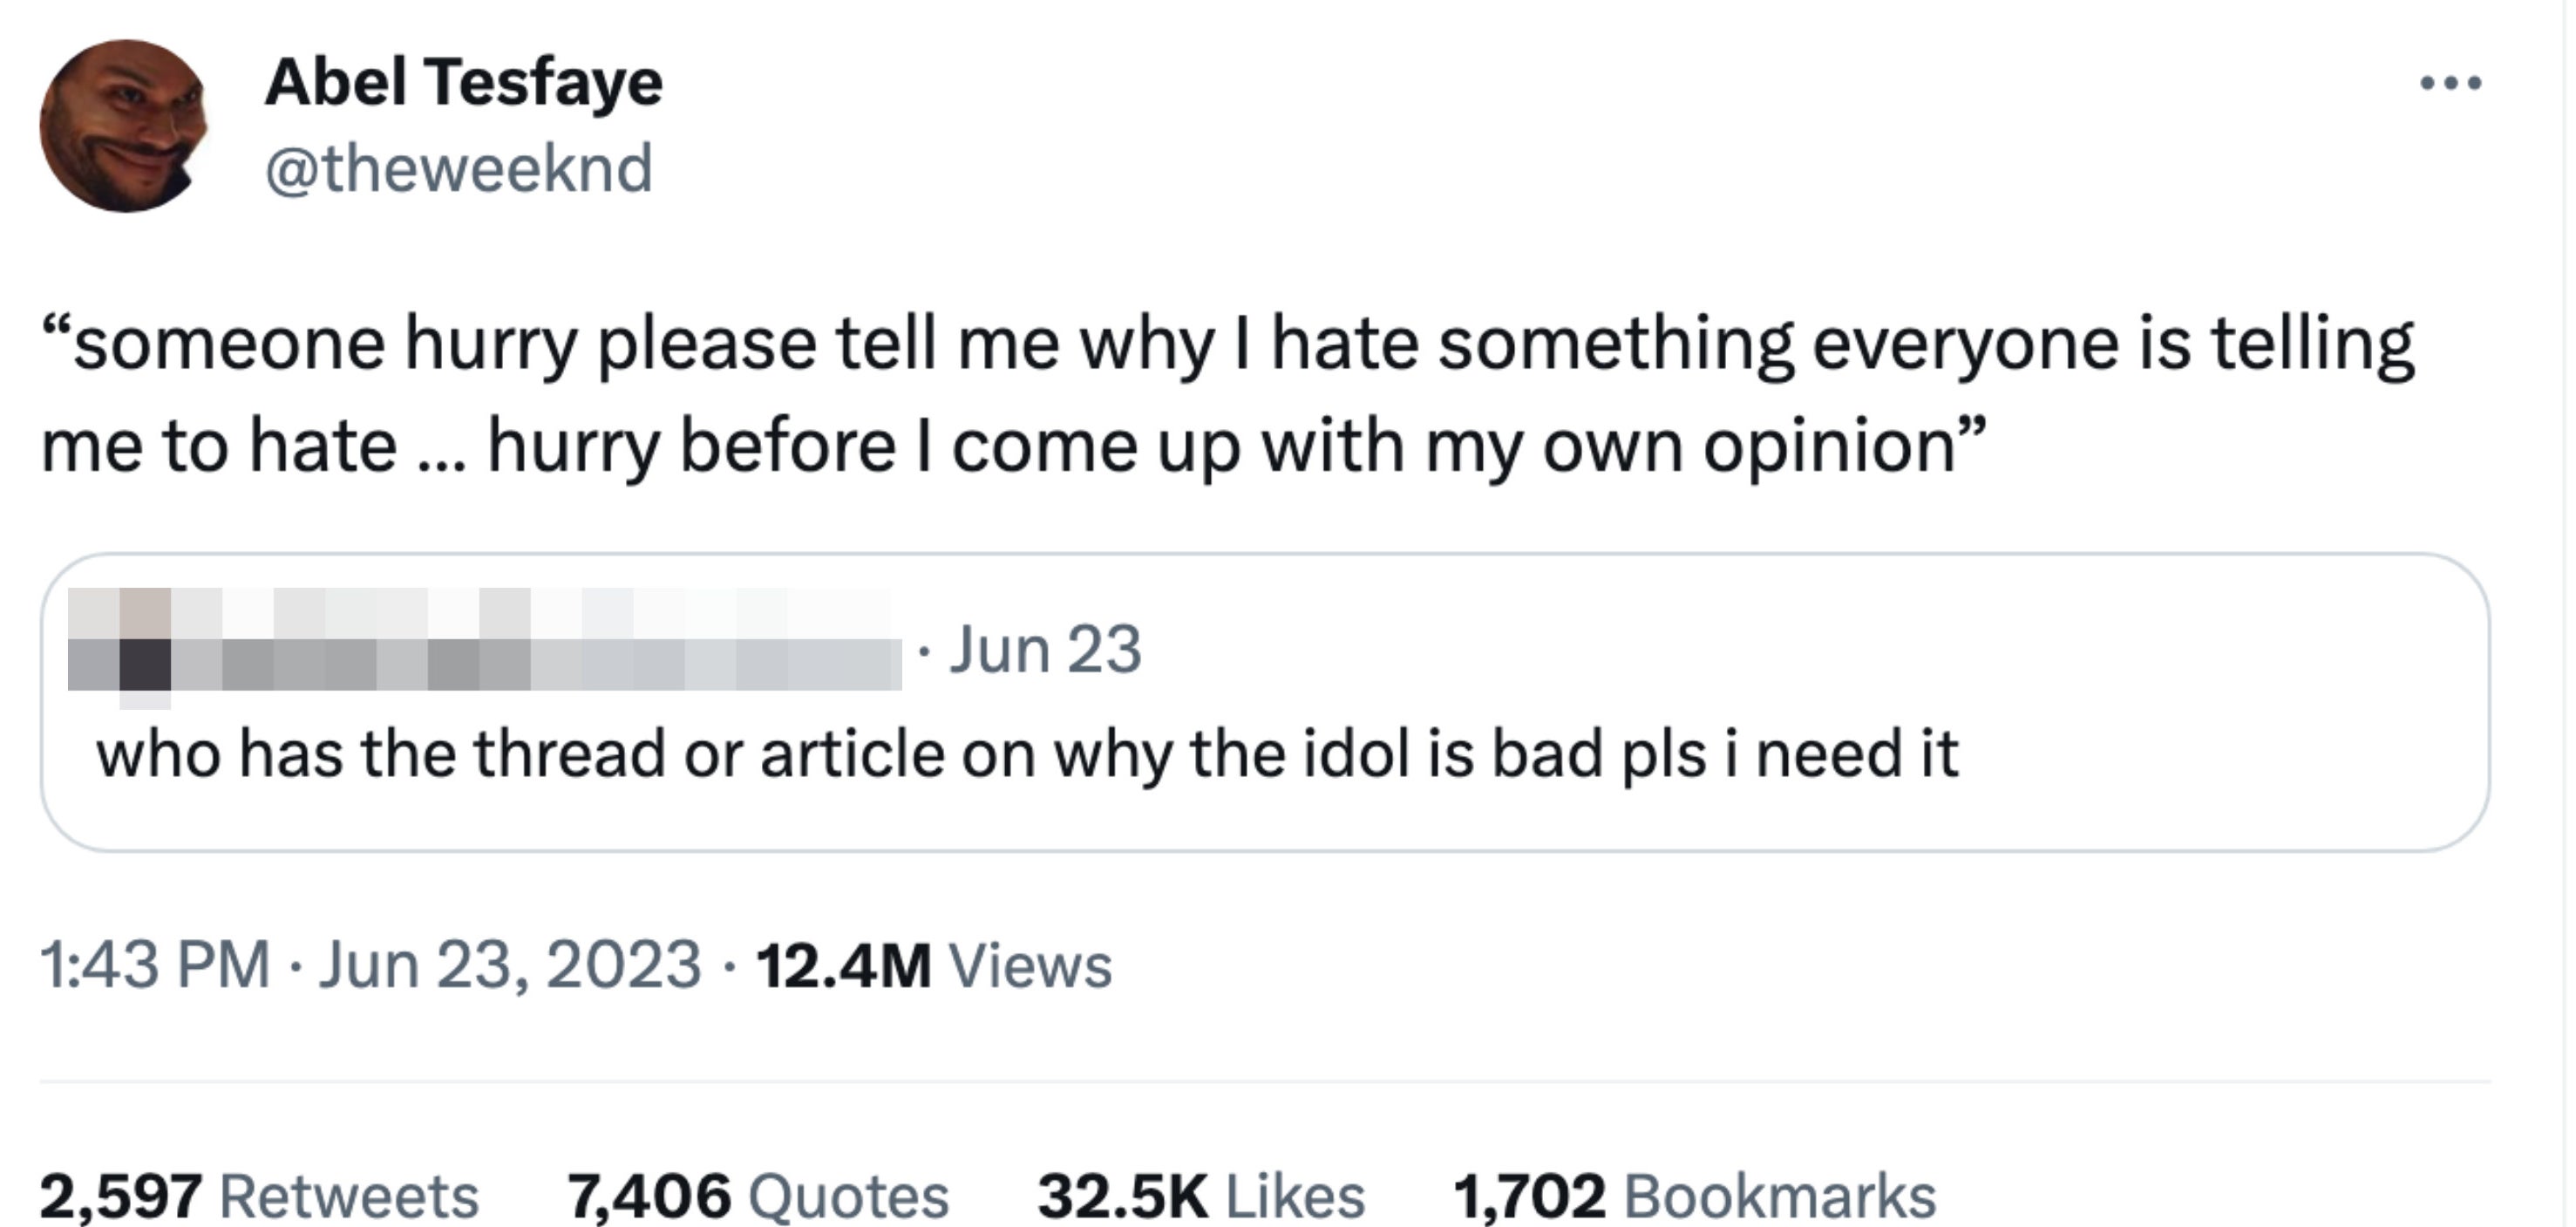 Comment: &quot;who has the thread or article on why the idol is bad pls i need it&quot; and he responds, &quot;someone hurry please tell me why I hate something everyone is telling me to hate — hurry before I come up with my own opinion&quot;